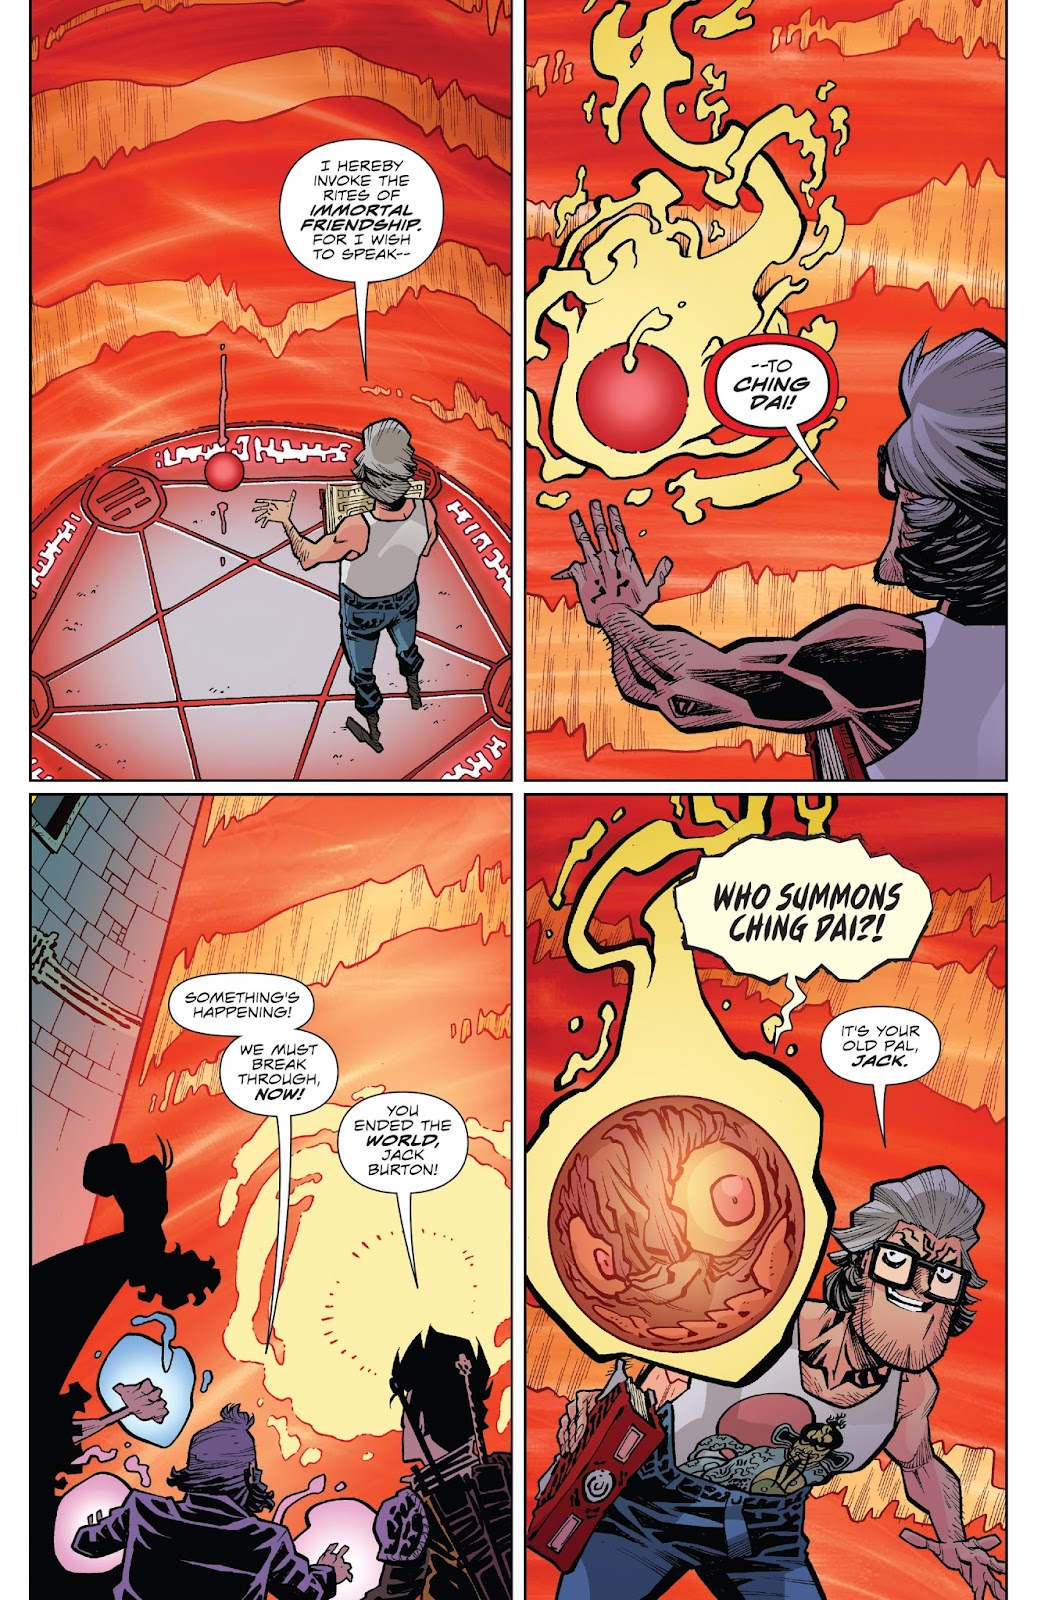 Big Trouble in Little China: Old Man Jack issue 8 - Page 13